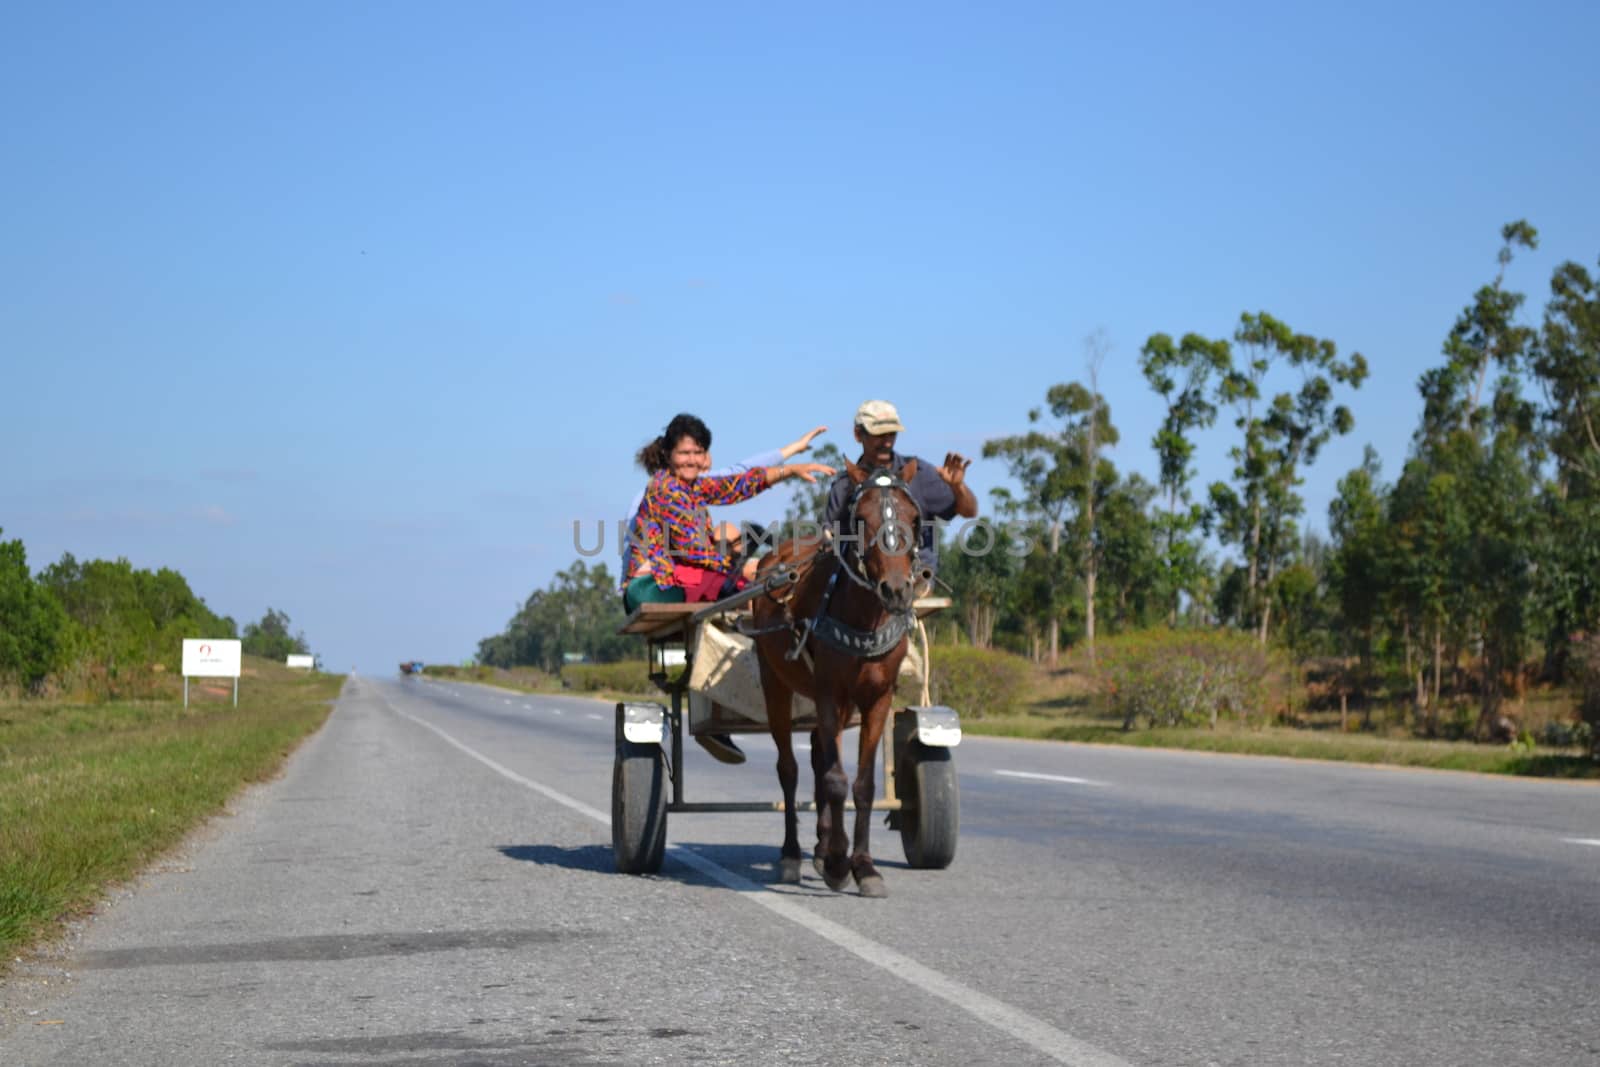 vinales, cuba, march 2011: Horse carriage on the cuban roads